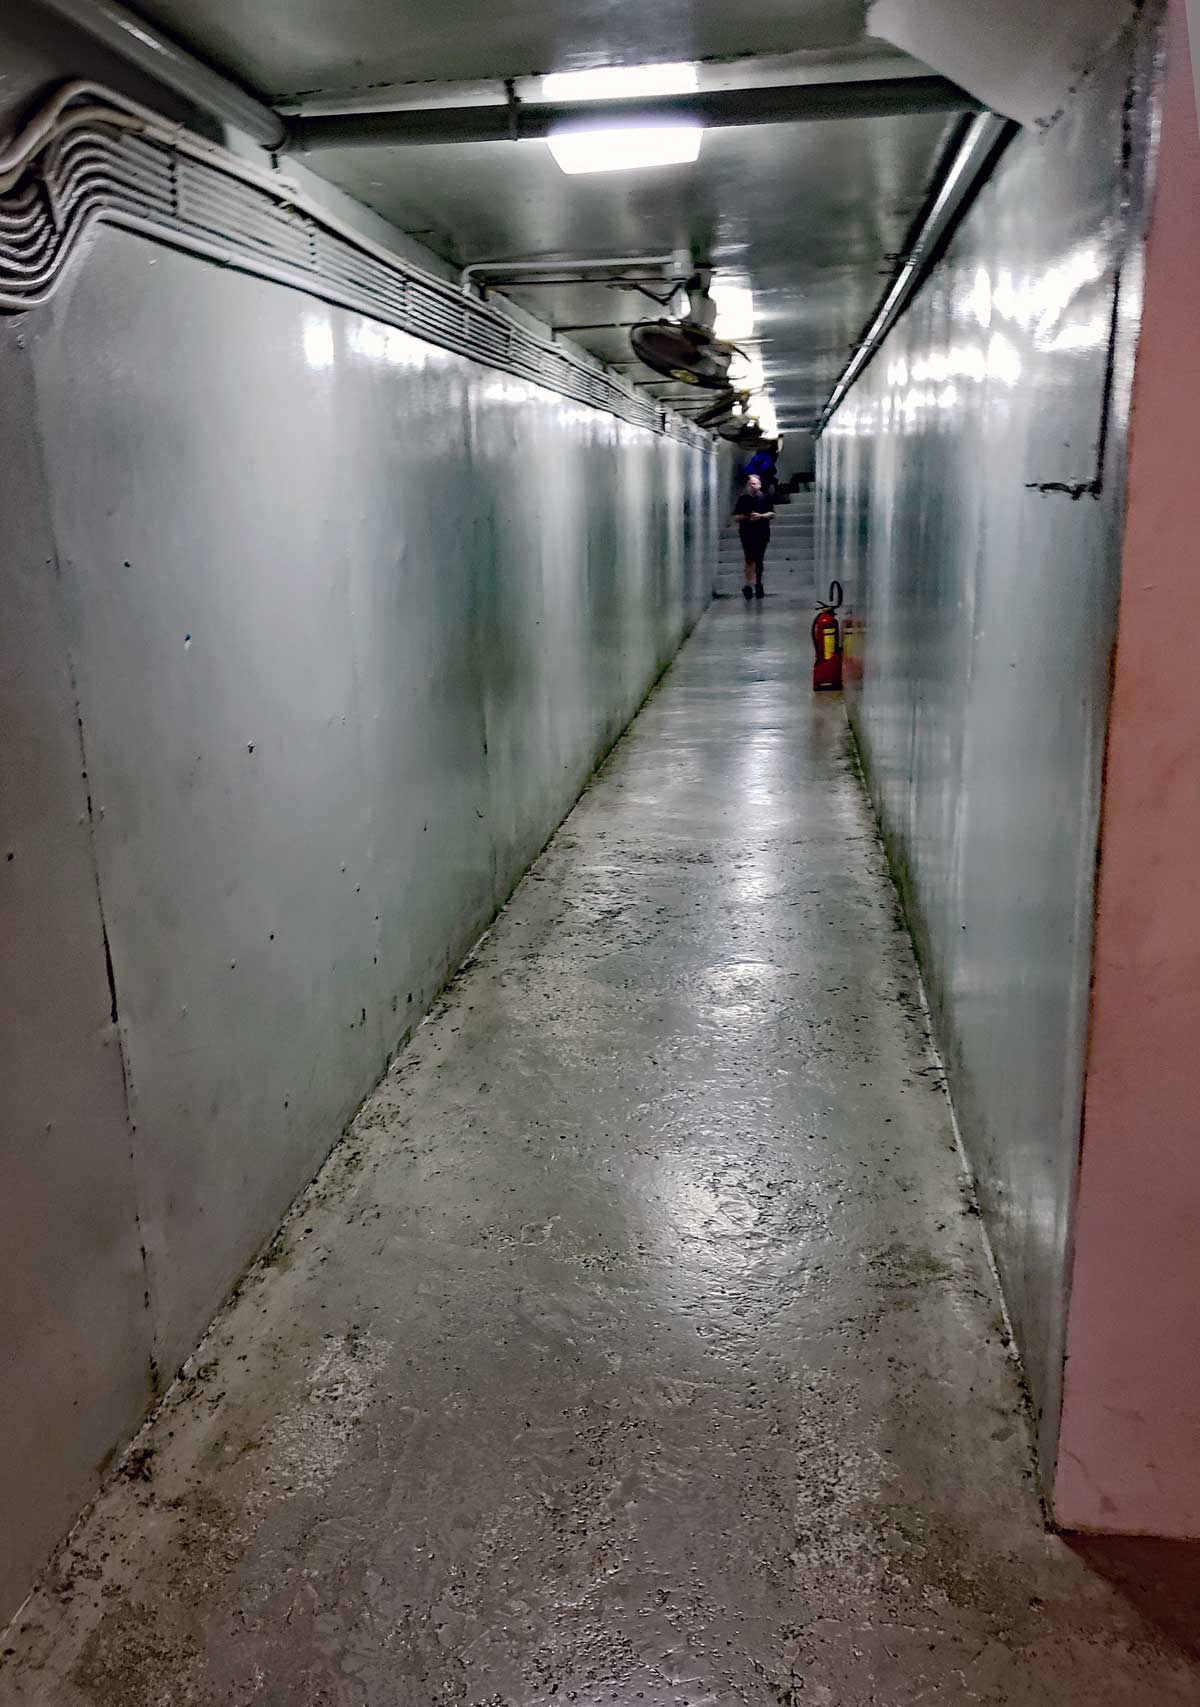 Long corridors are running the length of the Palace and numerous offices, communication rooms and bunk rooms are located along these corridors.